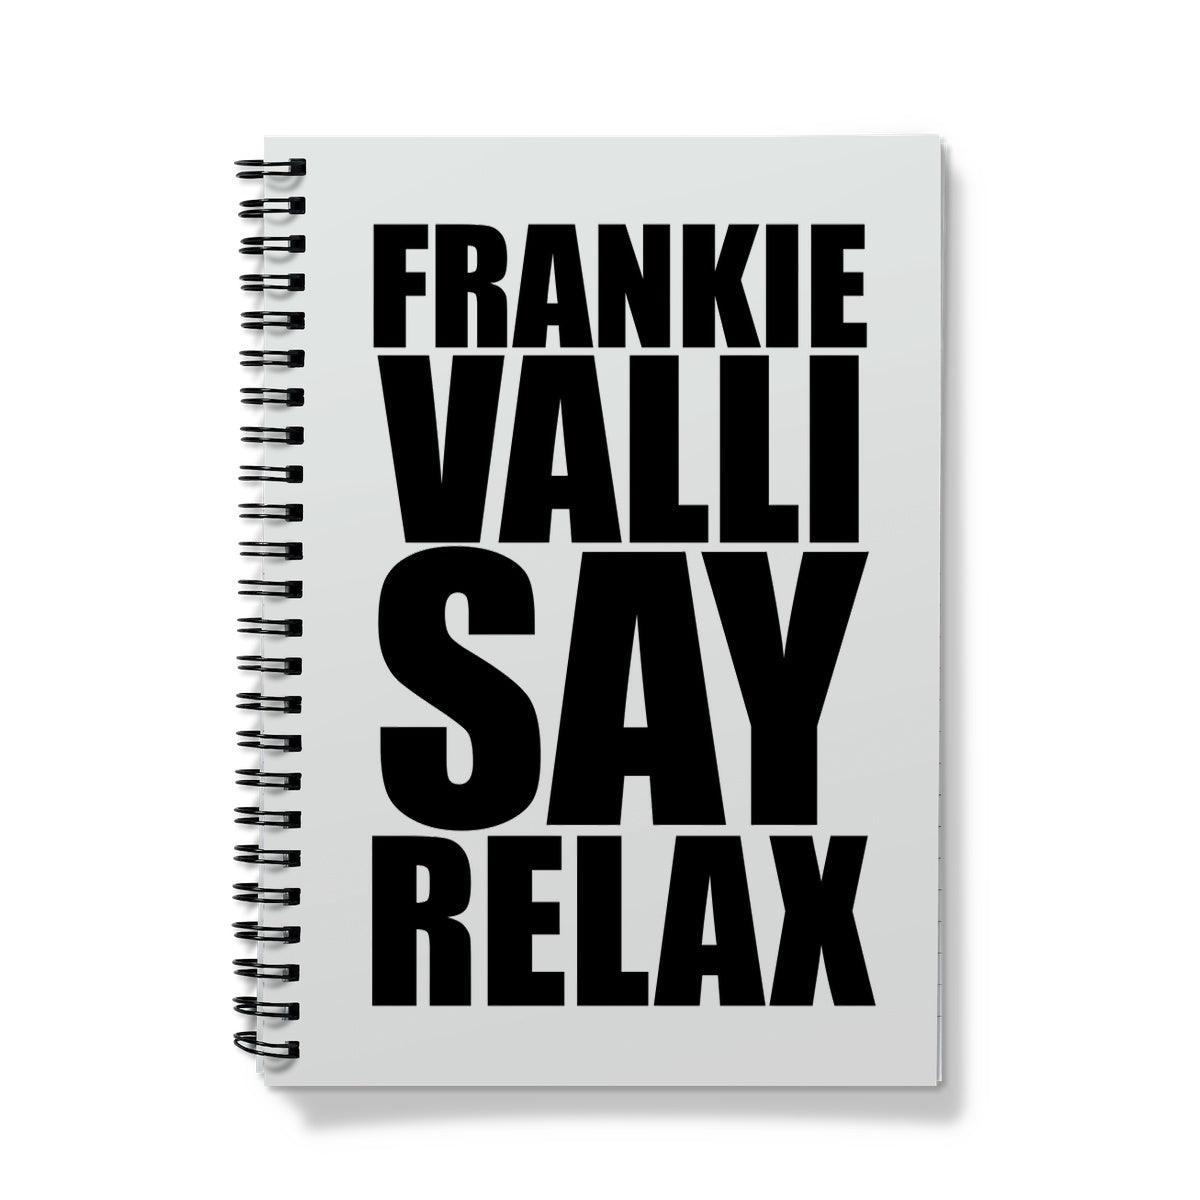 Frankie Valli Say Relax Notebook | Stationery A5 Graph